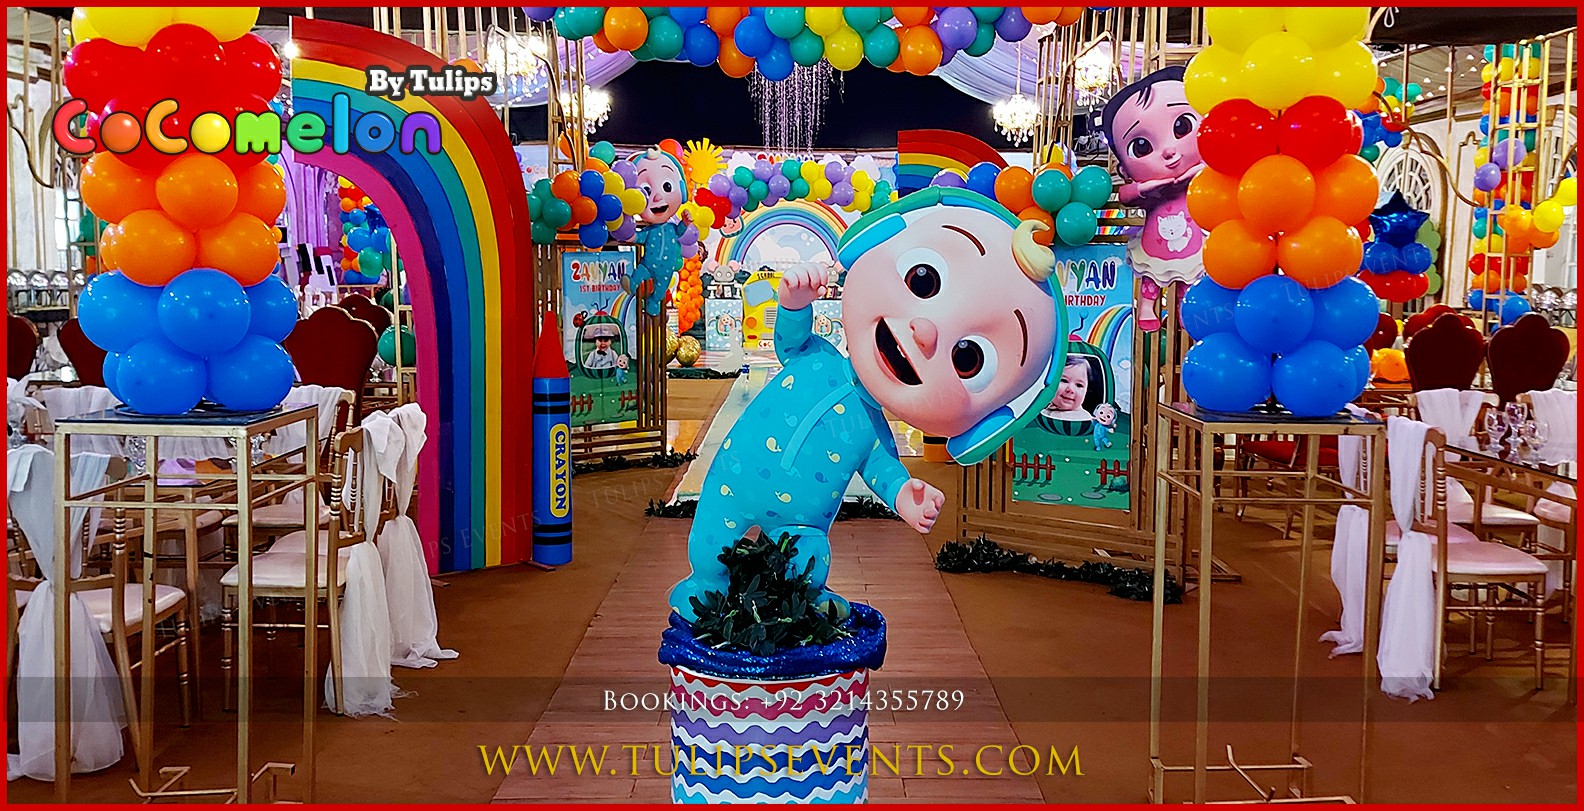 CoComelon Nursery Rhymes Party planner in Mirpur Pakistan (8)